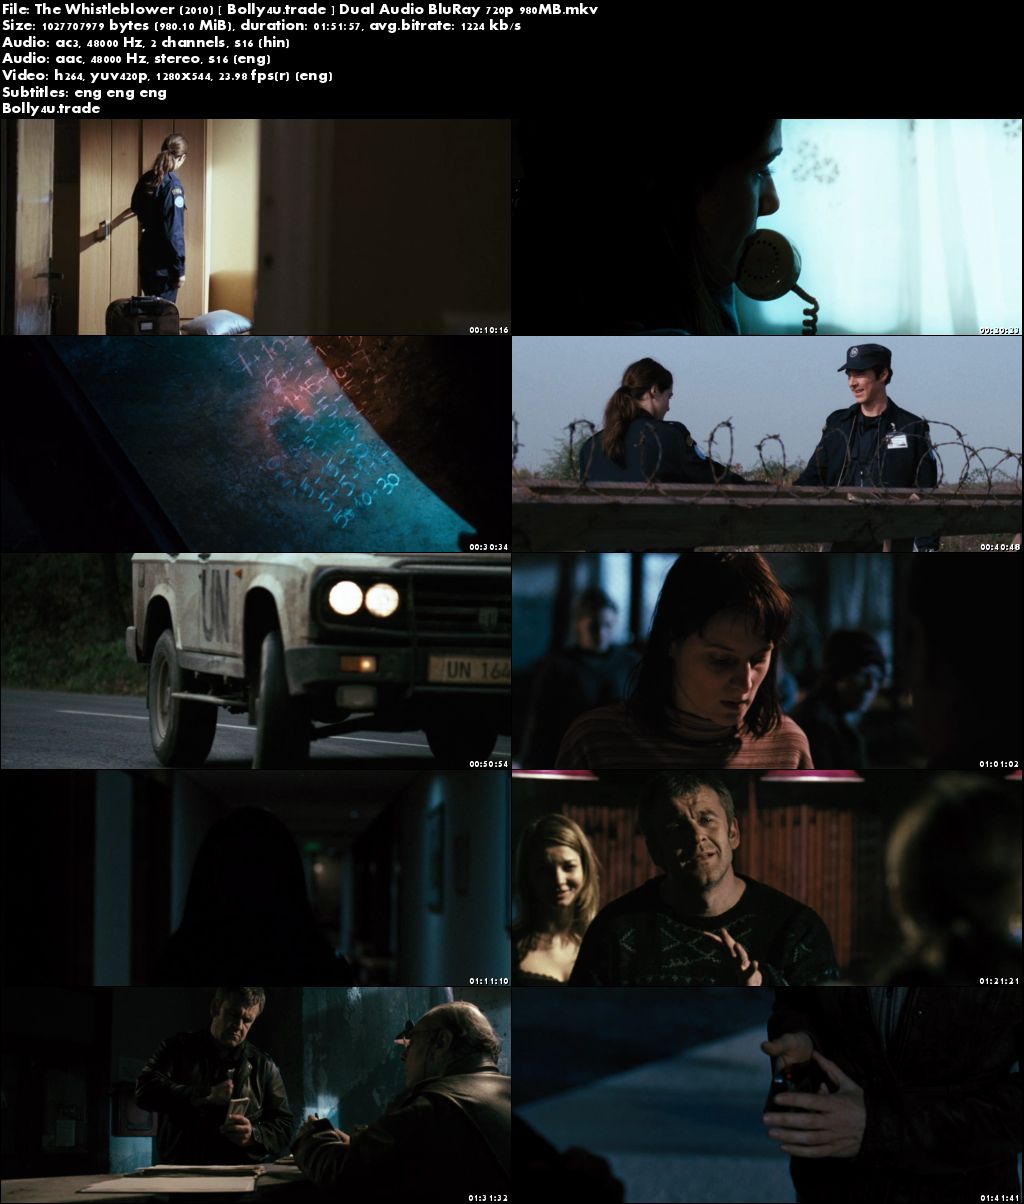 The Whistleblower 2010 BluRay 350MB Hindi Dubbed Dual Audio 480p Download